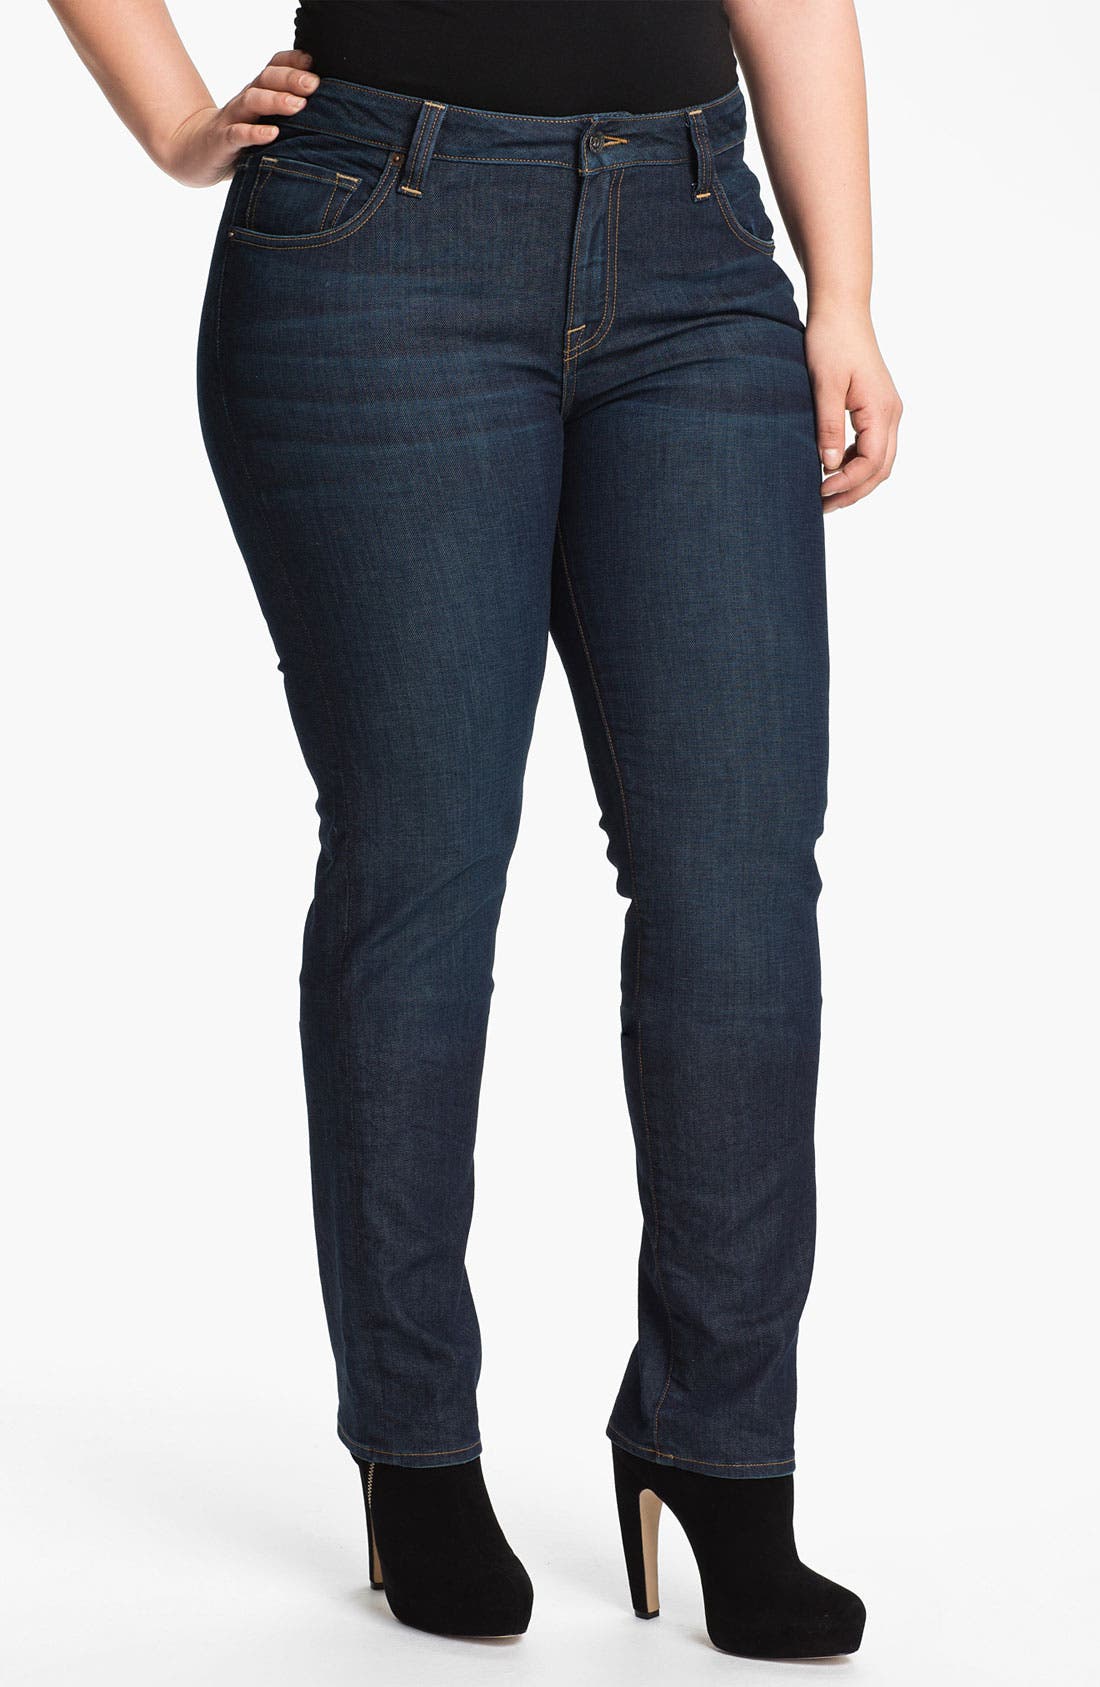 lucky brand plus size jeans